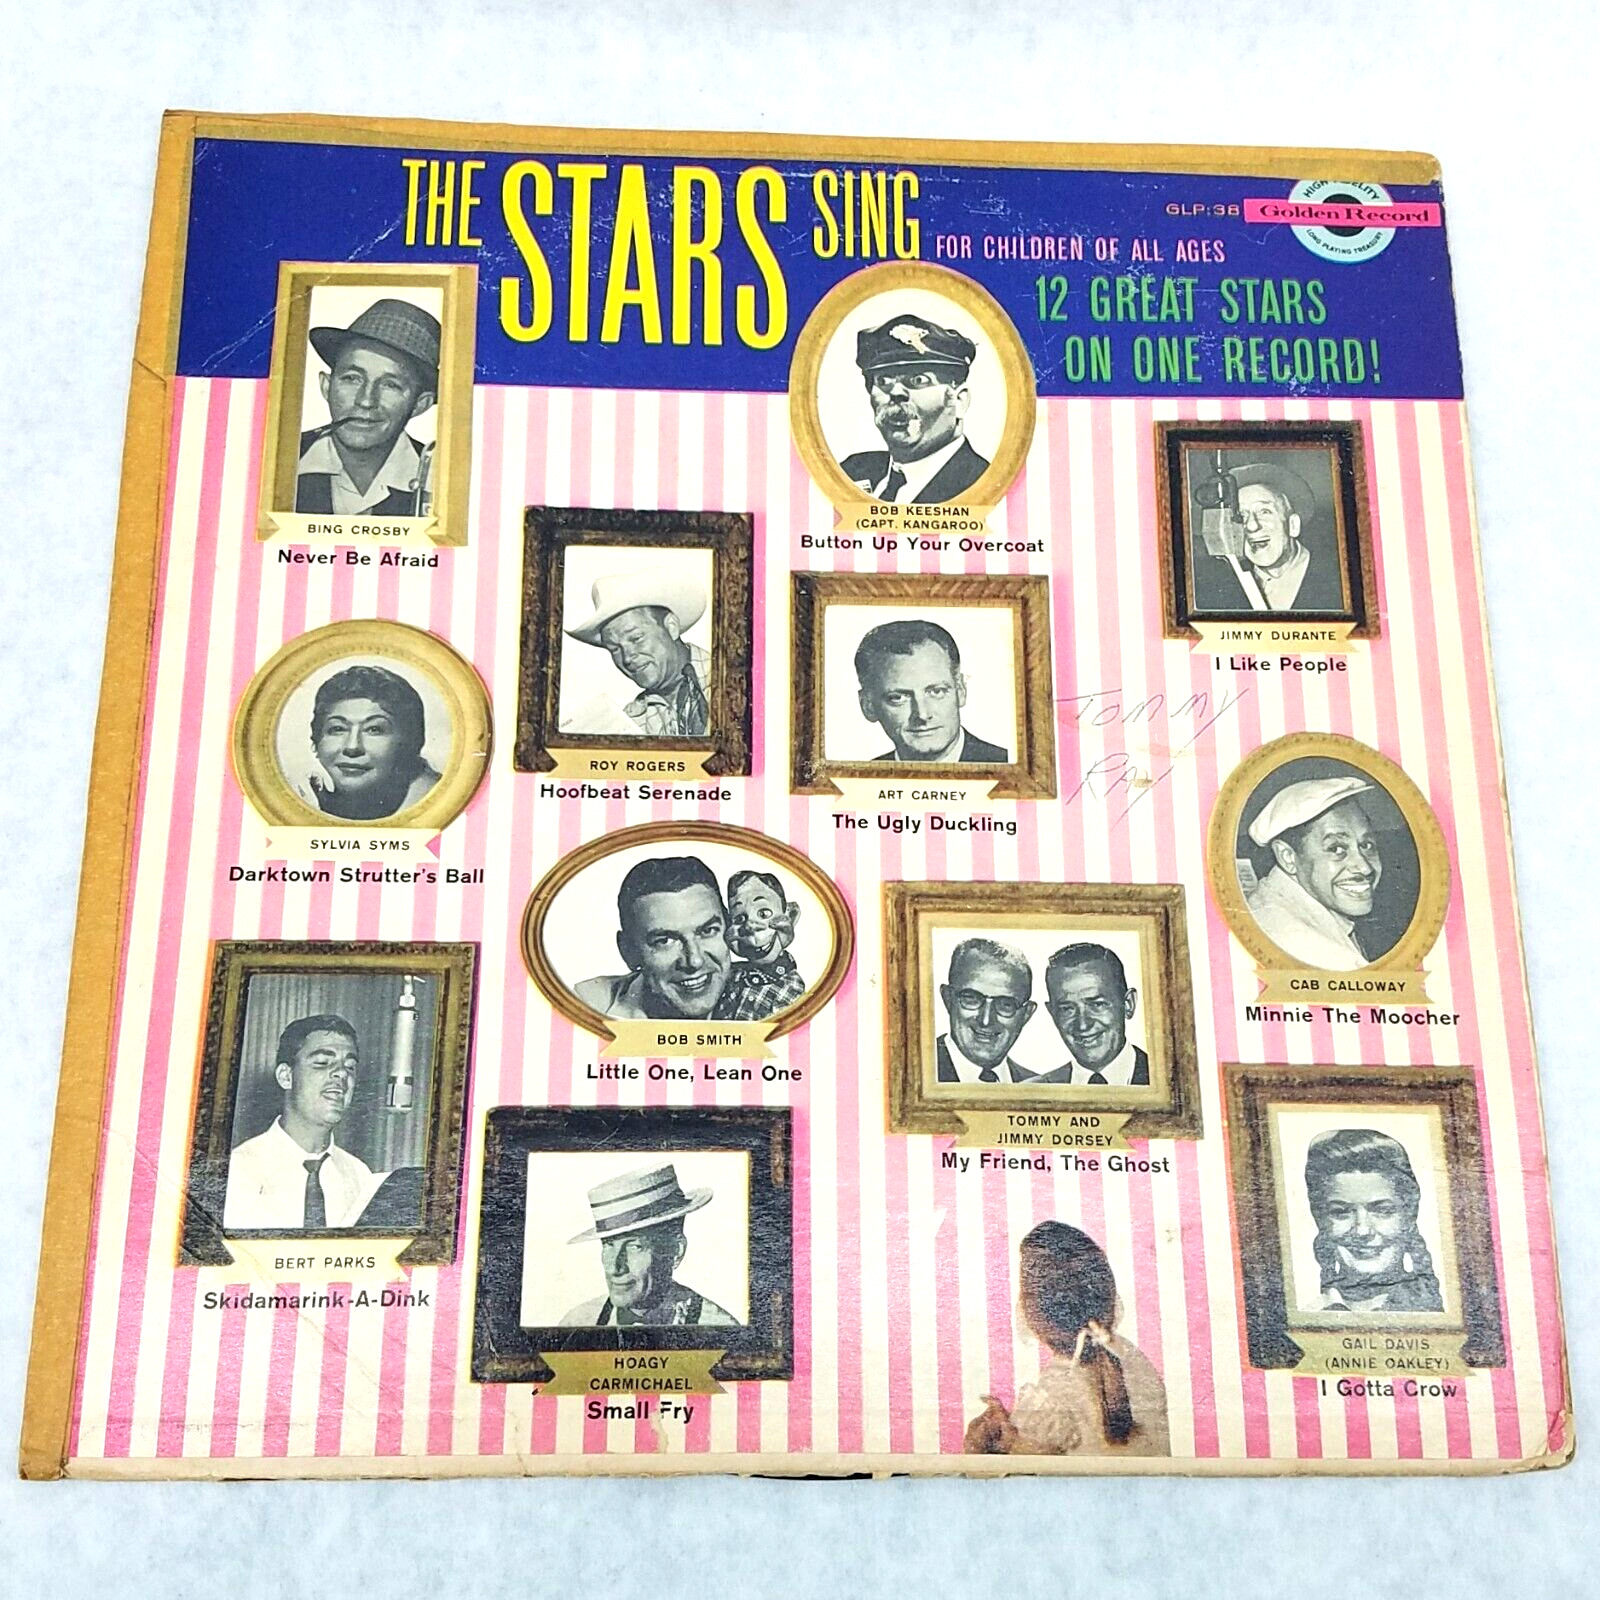 The Stars Sing for Children of All Ages - 1958 Record GLP:38